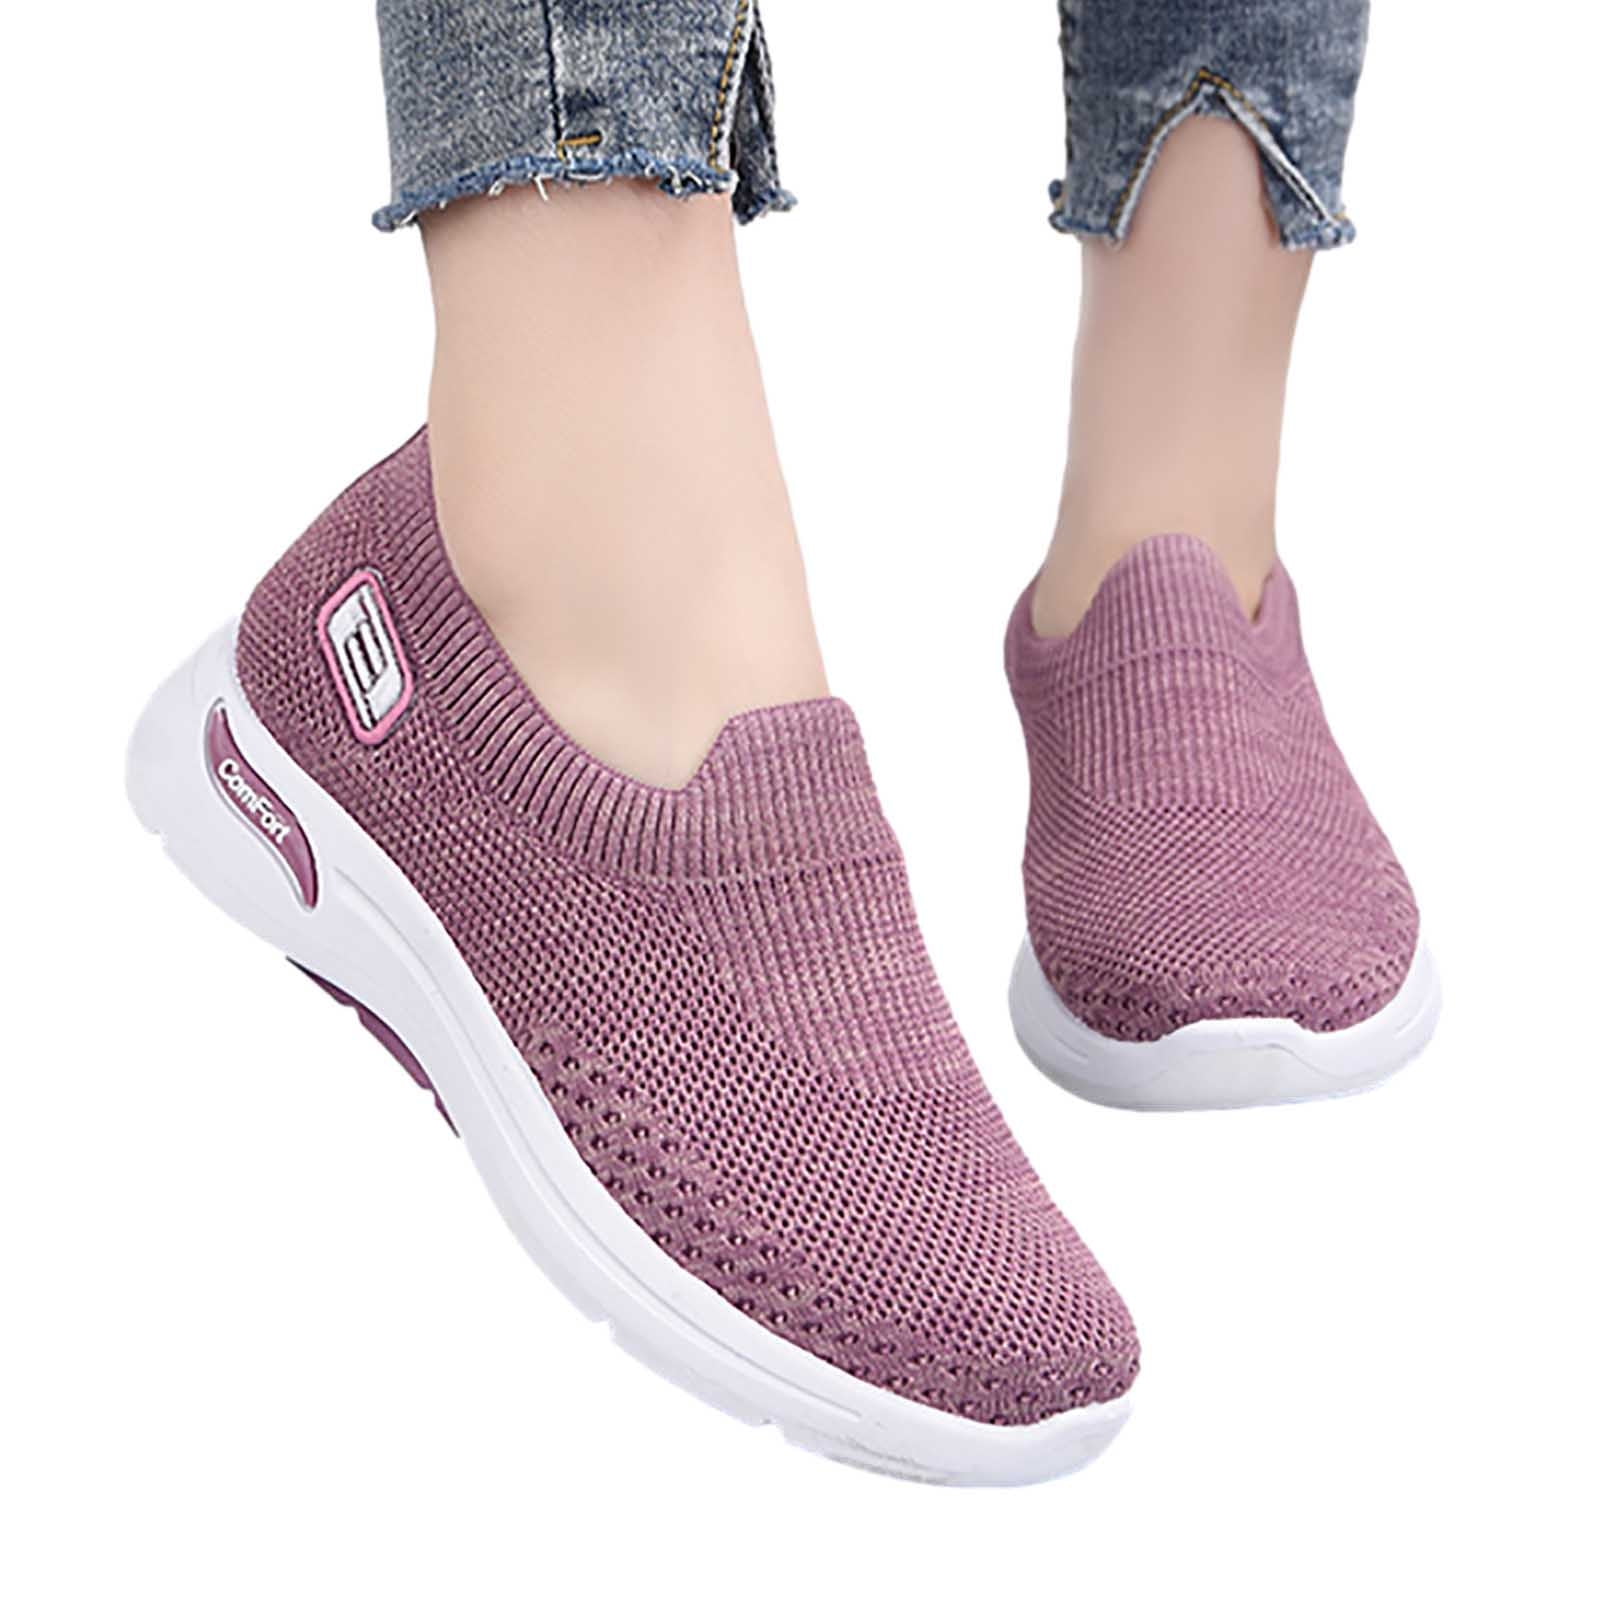 Babysbule Womens Shoes Clearance, Fashion Women Shoe Soft-soled Comfortable  Flying Woven Casual Ladies Shoes